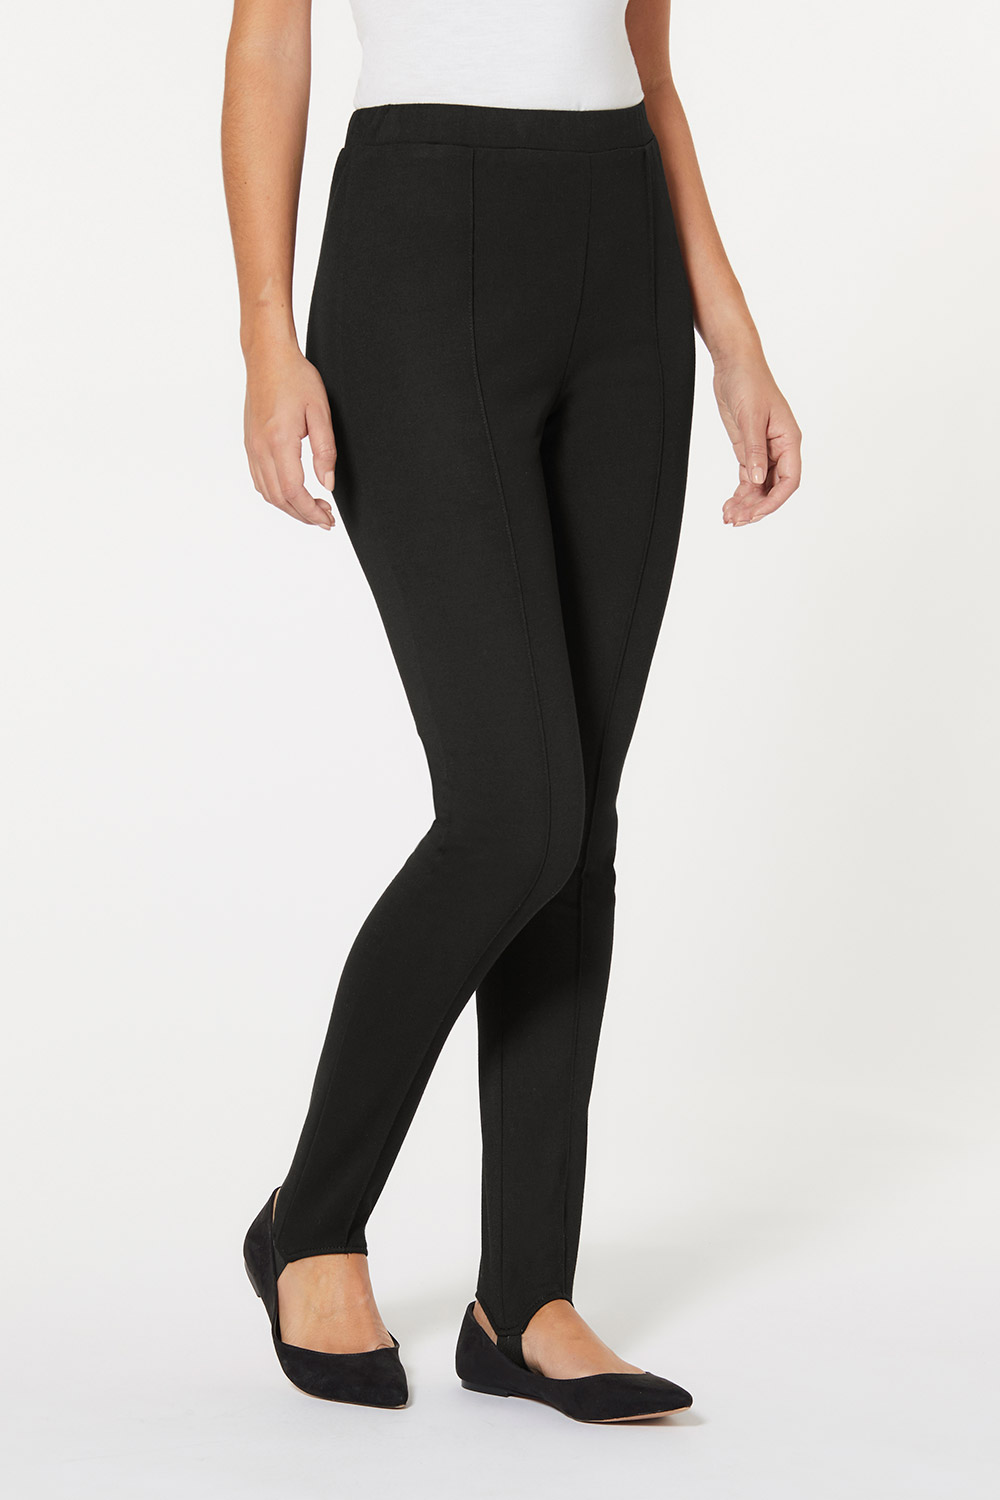 Buy Ponte Ski Pant, Fast Home Delivery